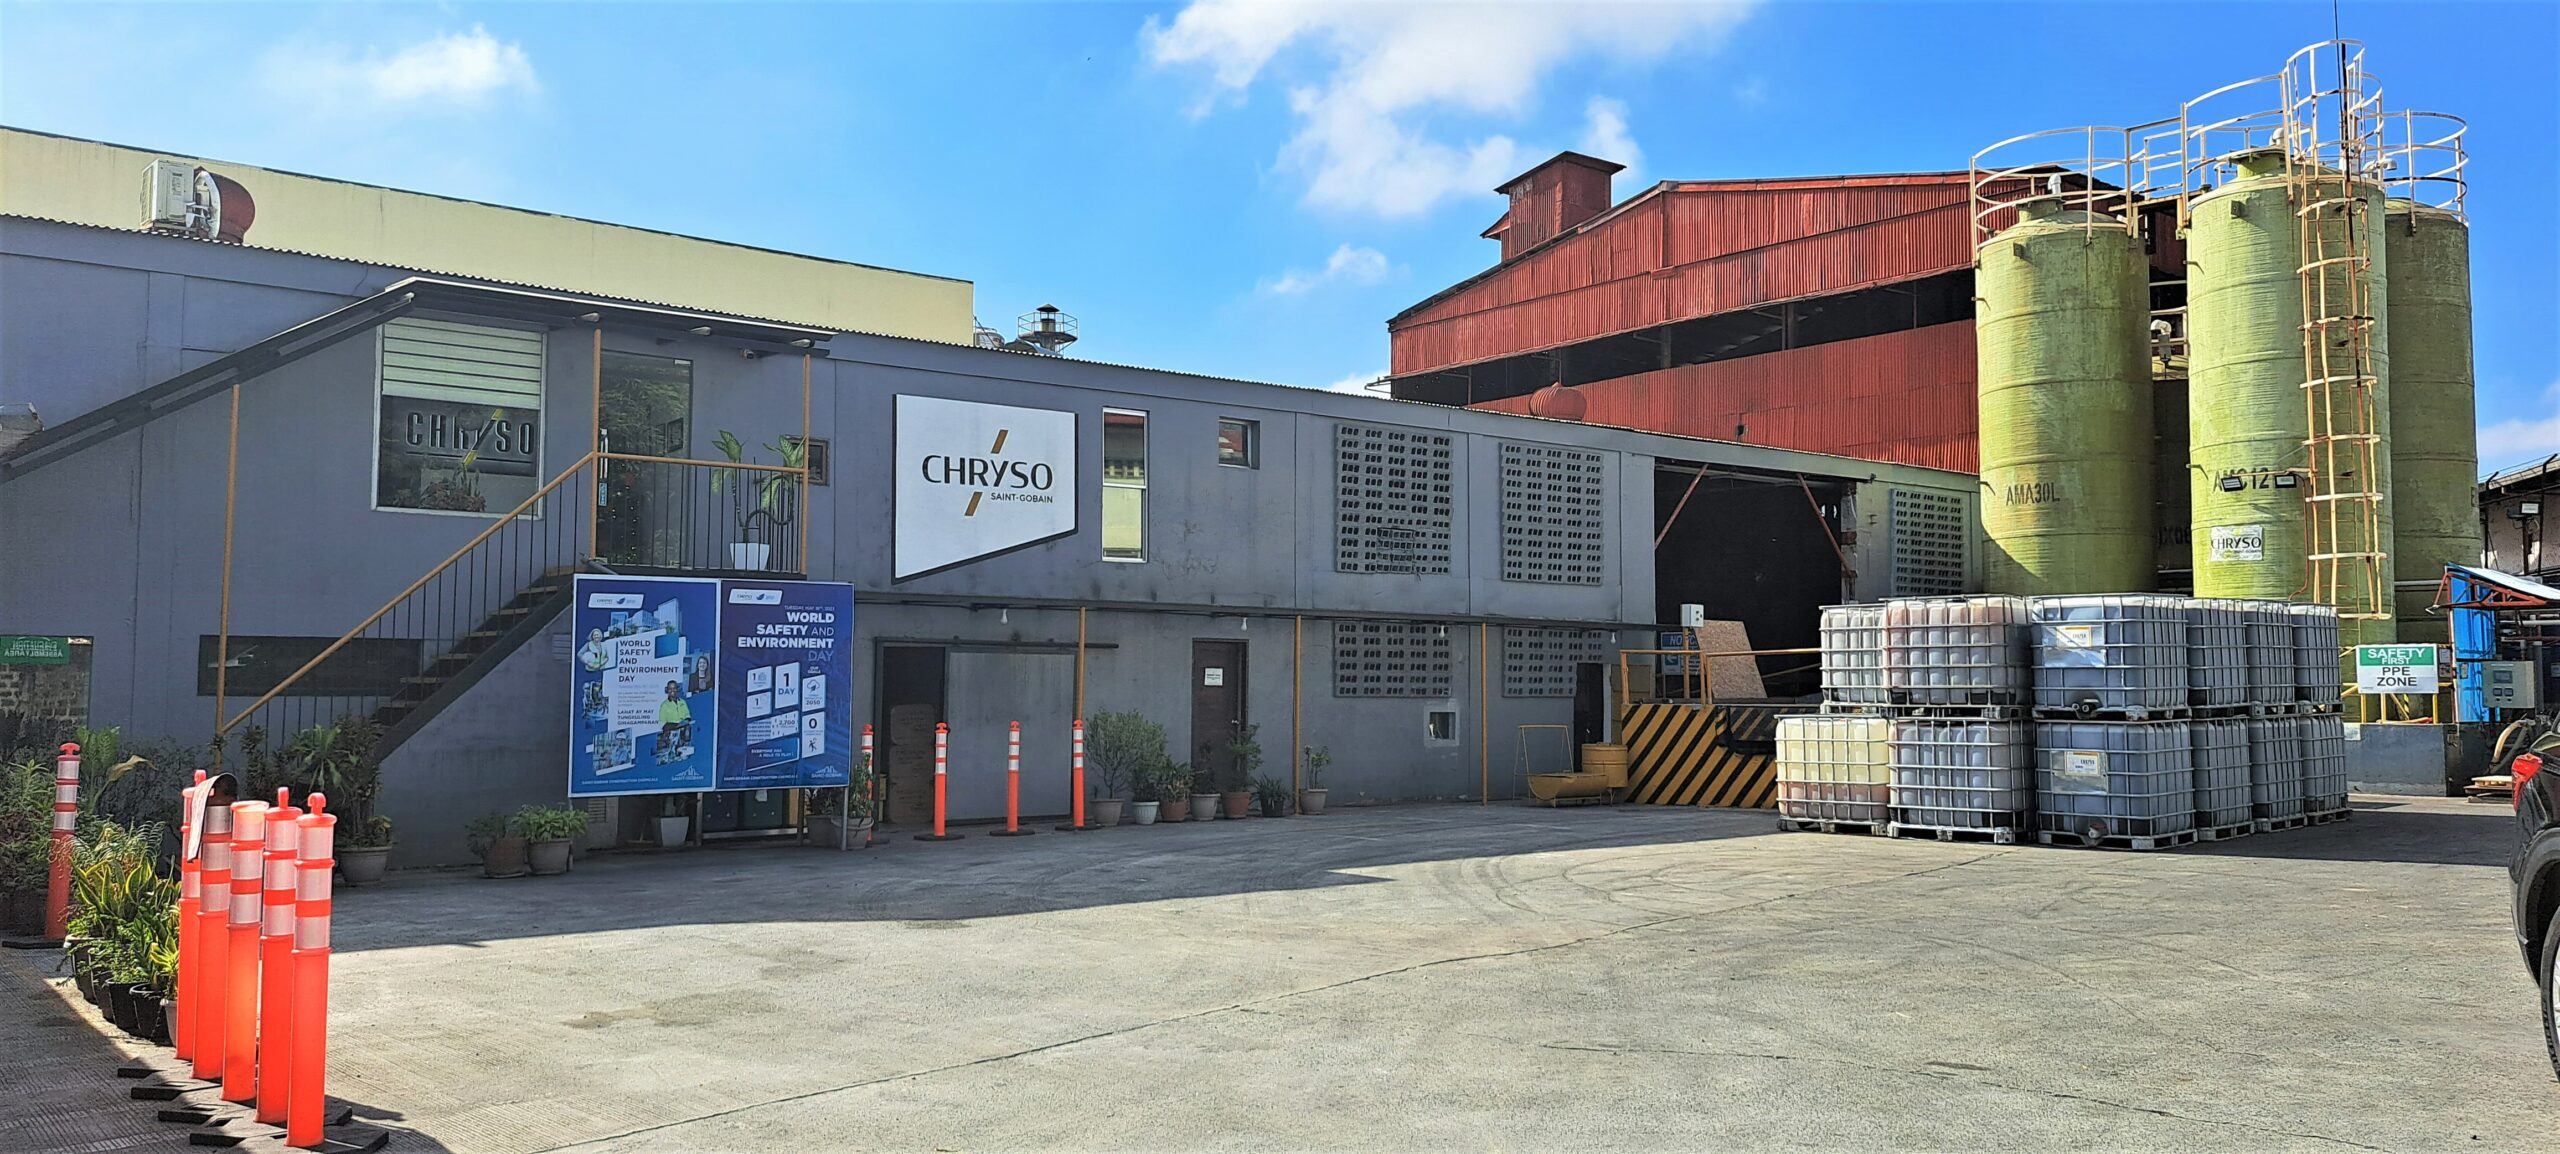 Chryso Philippines facility